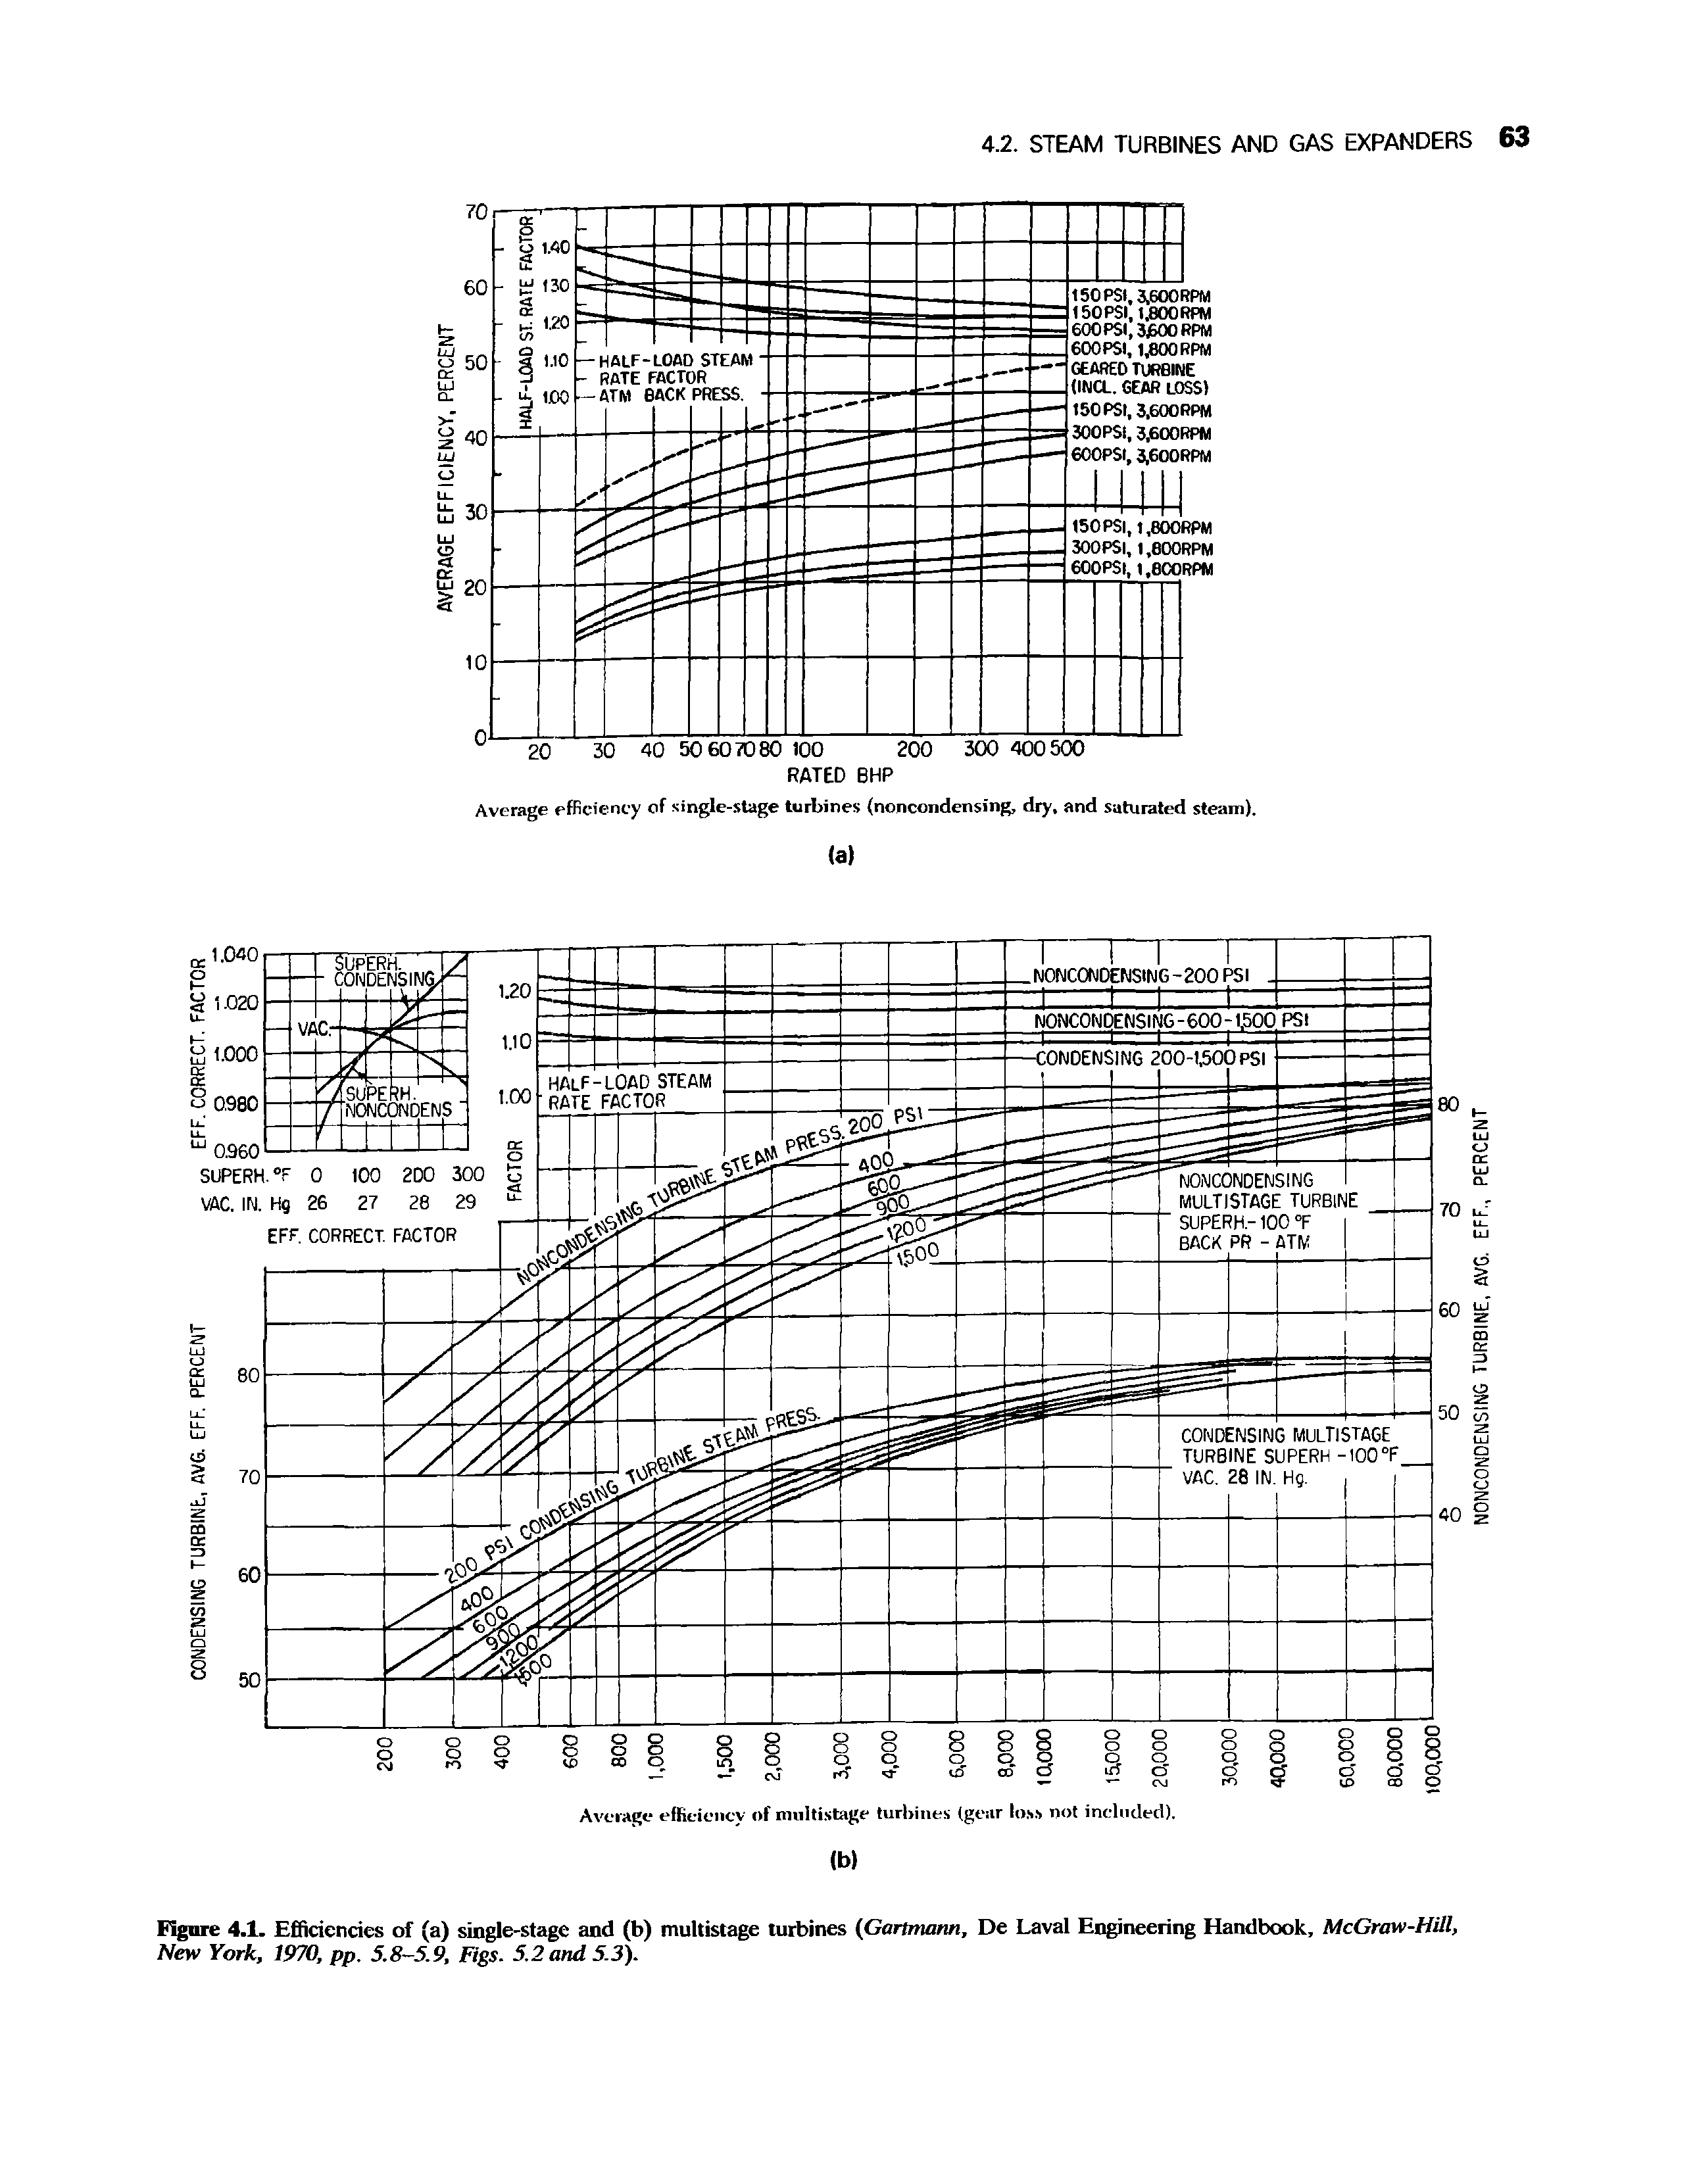 Figure 4.1. Efficiencies of (a) single-stage and (b) multistage turbines (Gartmann, De Laval Engineering Handbook McGraw-Hill, New York, 1970, pp. 5.8-59, Figs. 5.2and 5.3).